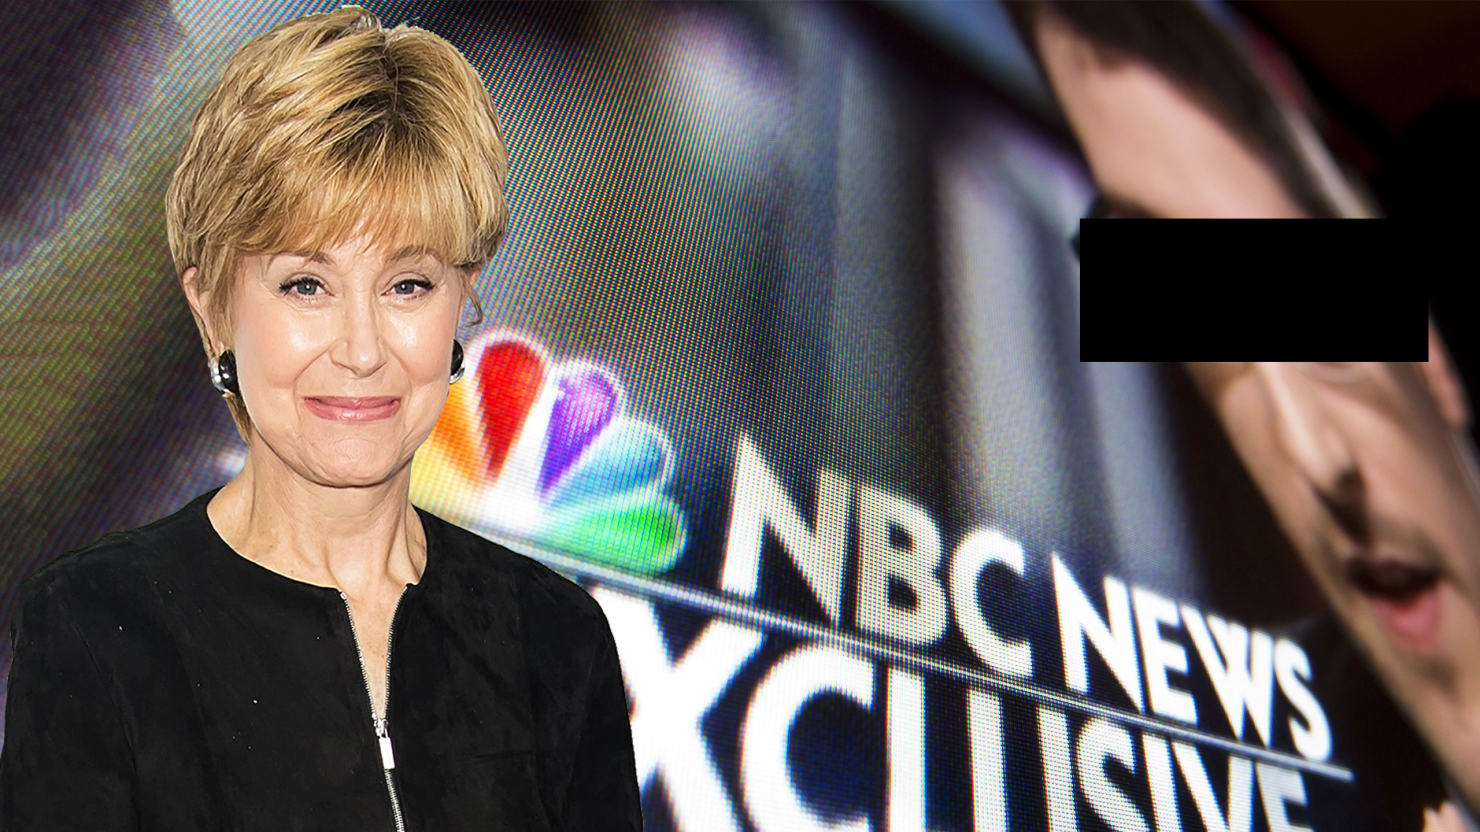 Jane Pauley: I Was Sexually Harassed at NBC.